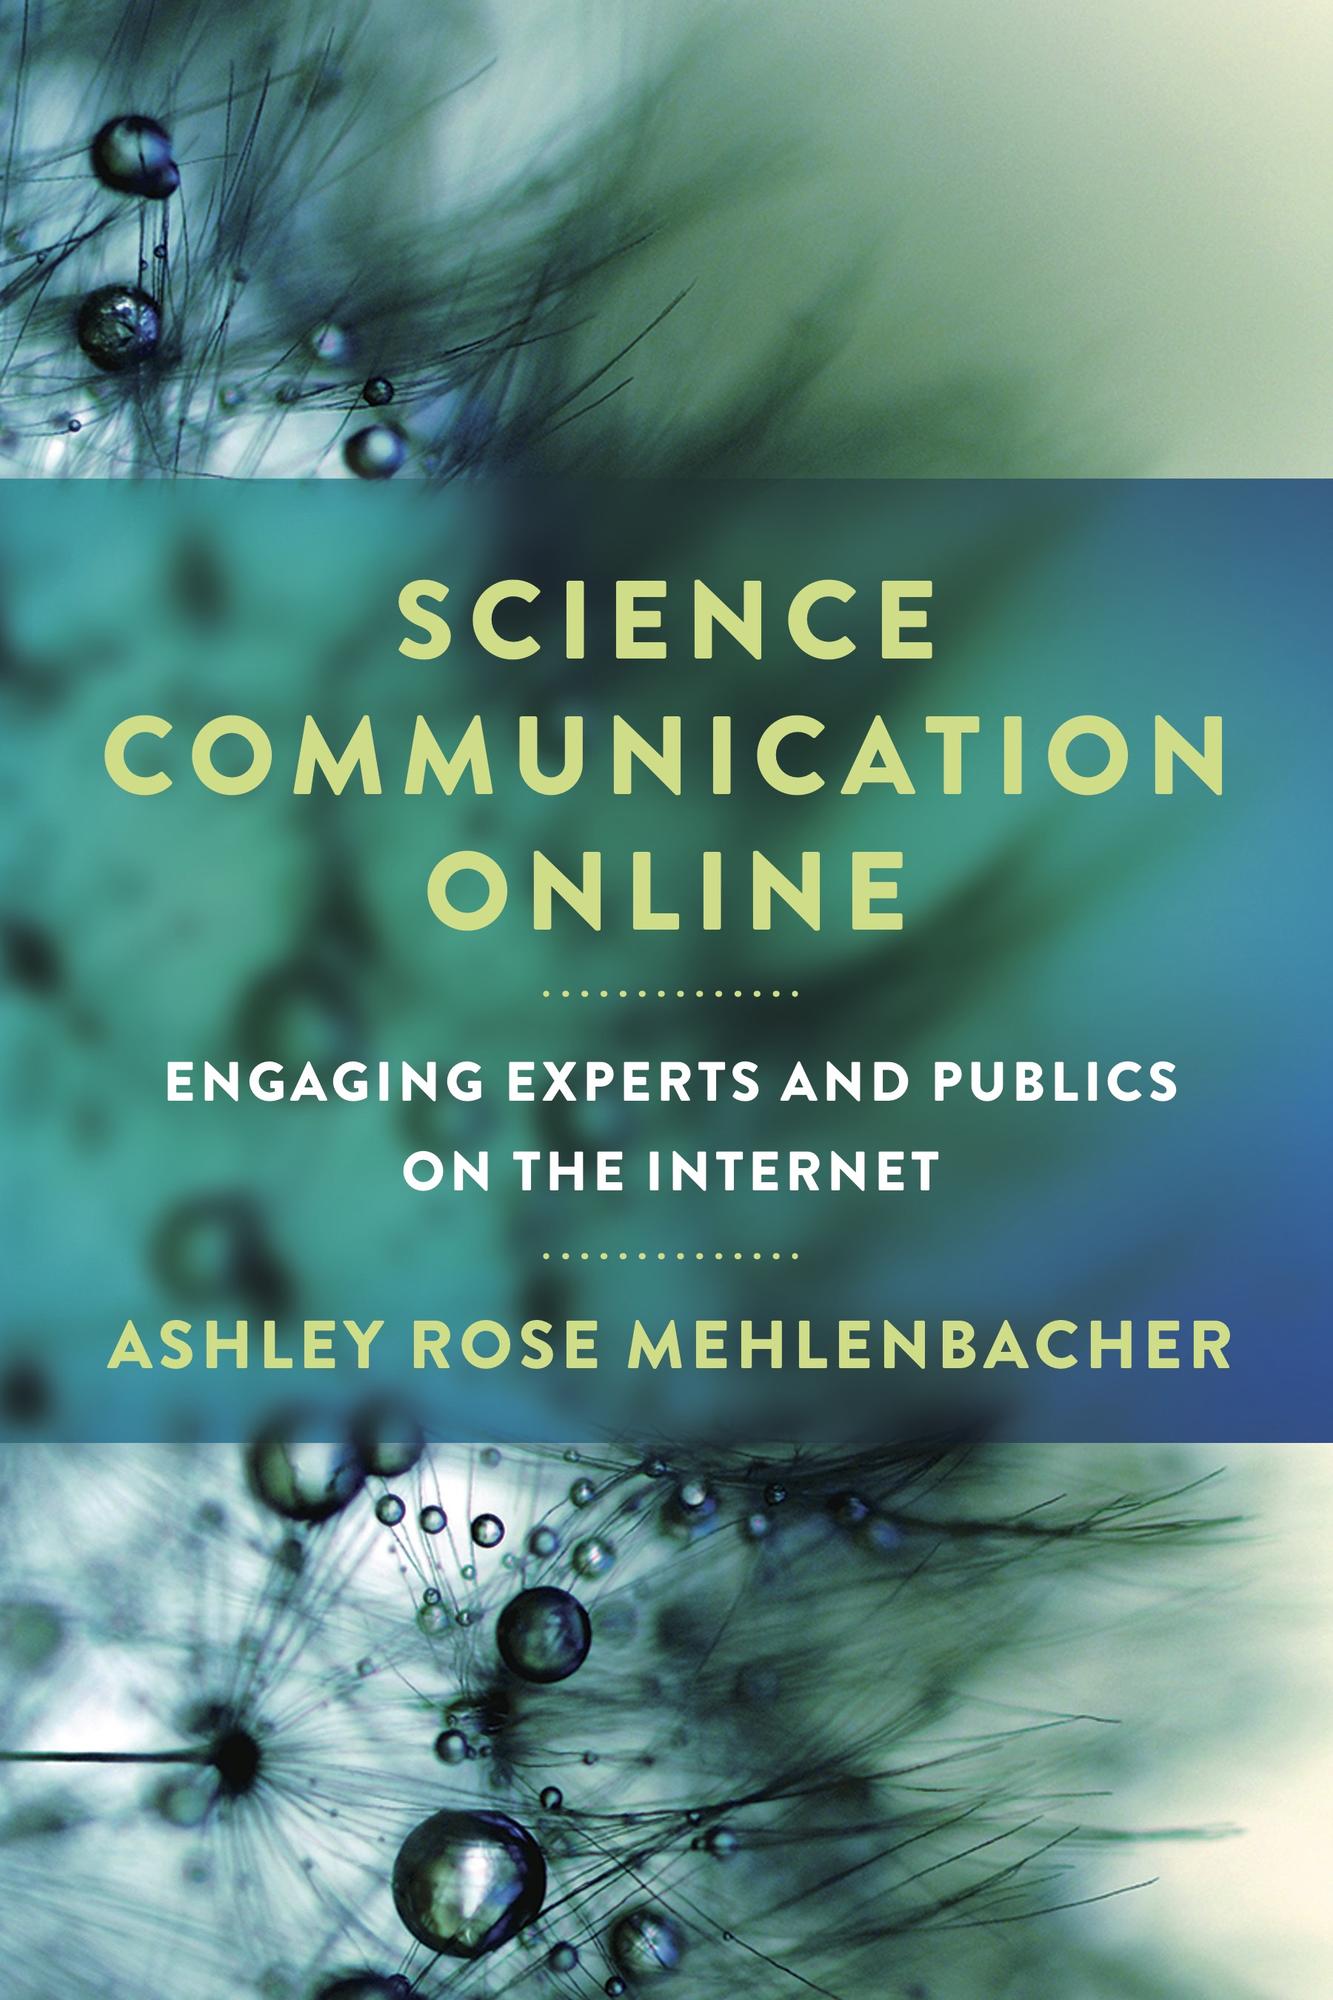 Cover image for Science Communication Online: Engaging Experts and Publics on the Internet By Ashley Rose Mehlenbacher.